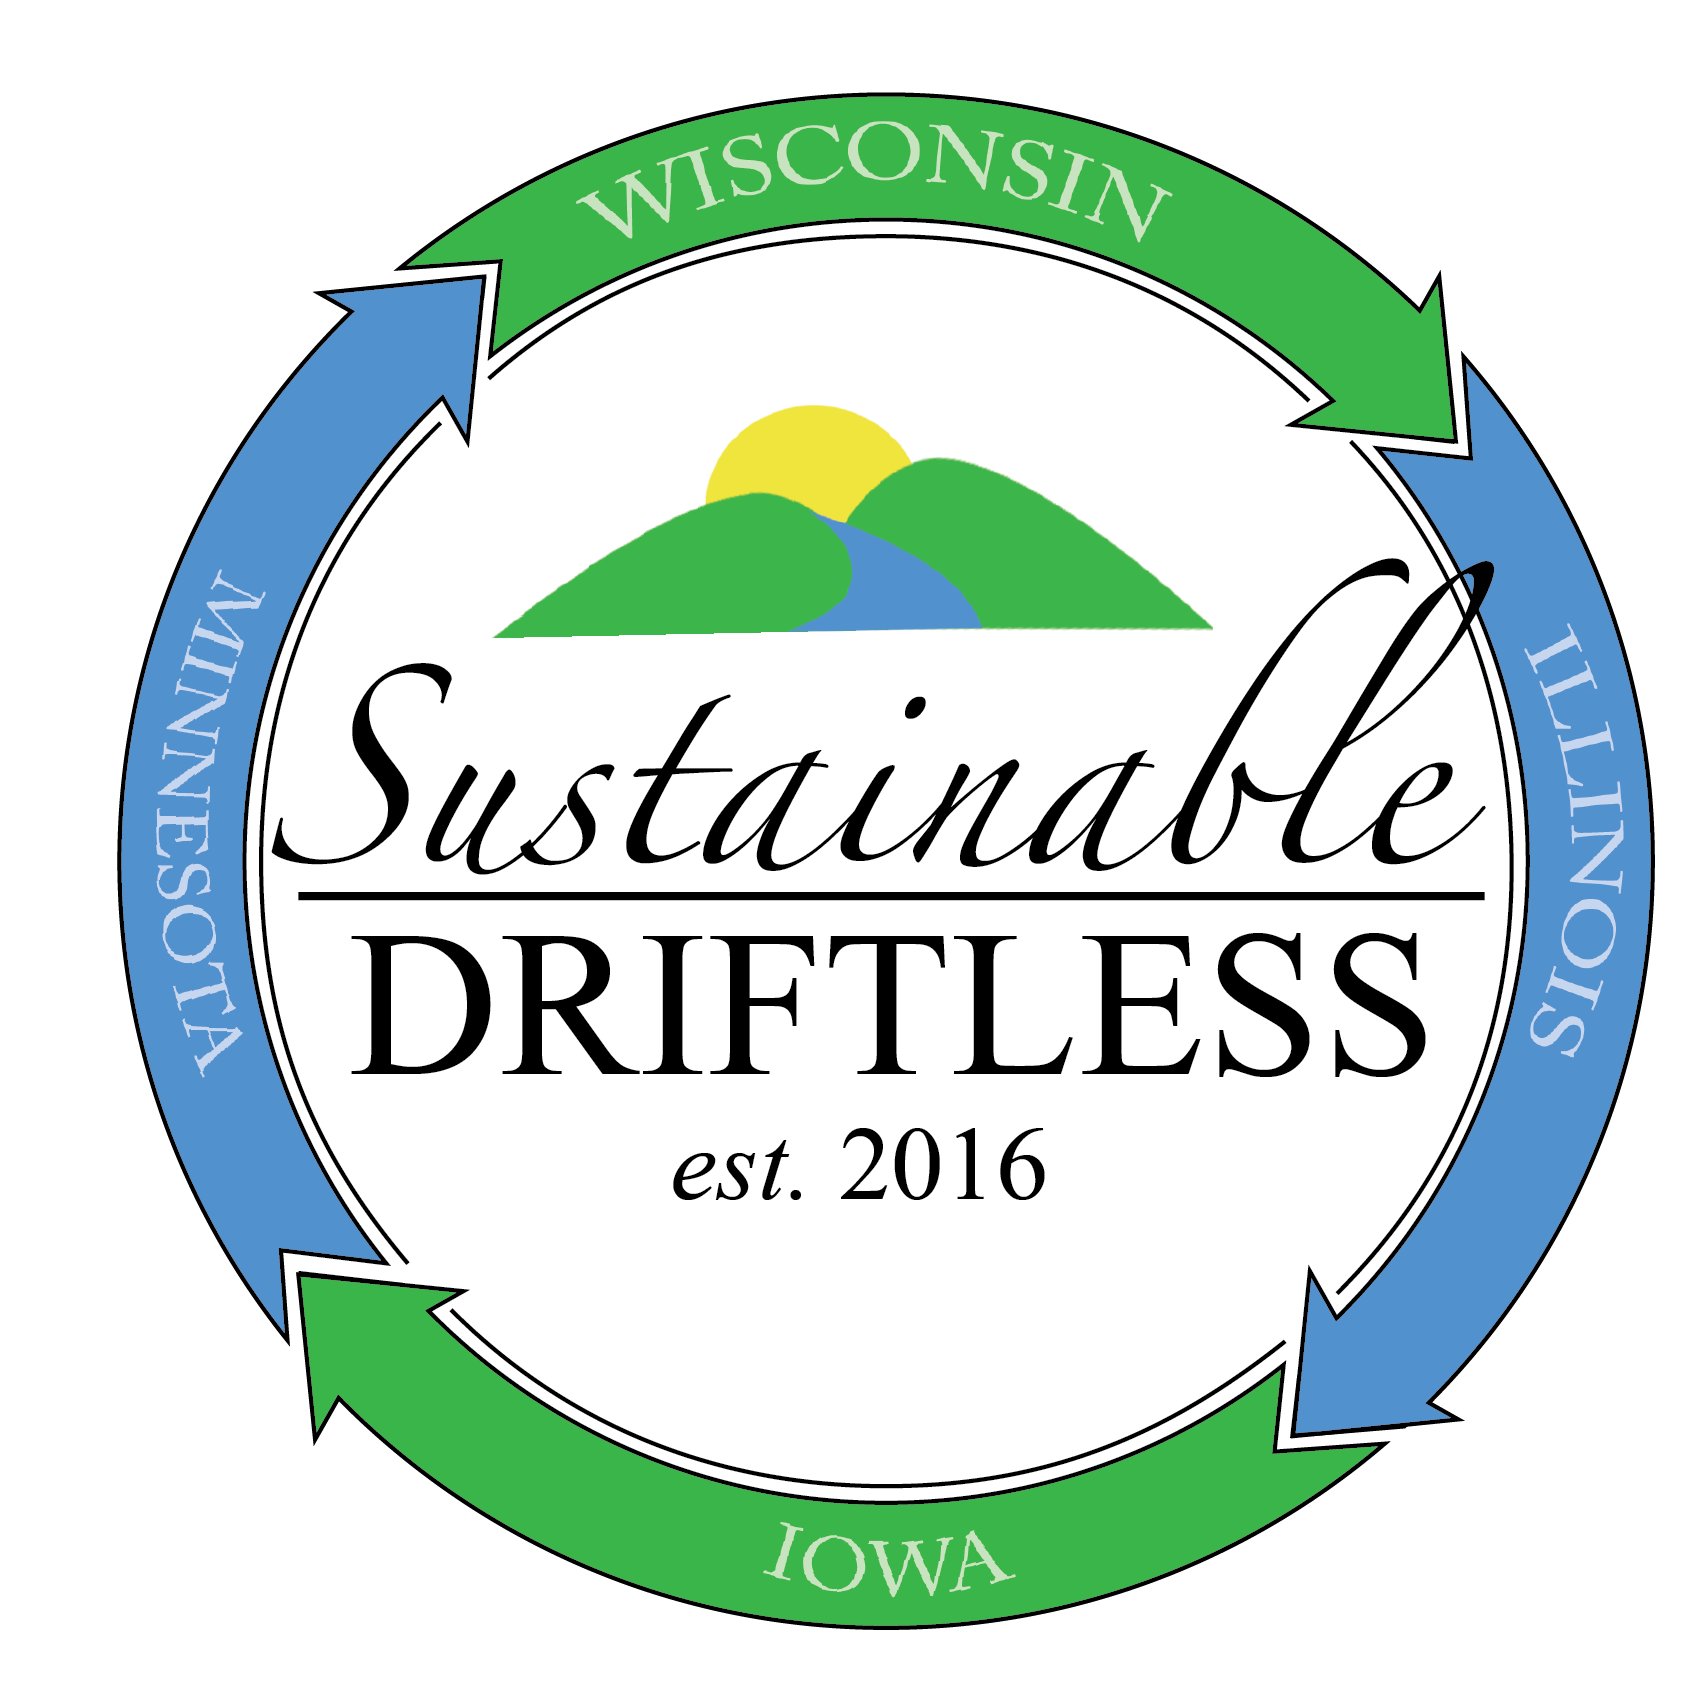 Sustainable Driftless, Inc. is dedicated to inspiring resource conservation, vibrant communities, and sustainable growth in the Driftless Region.